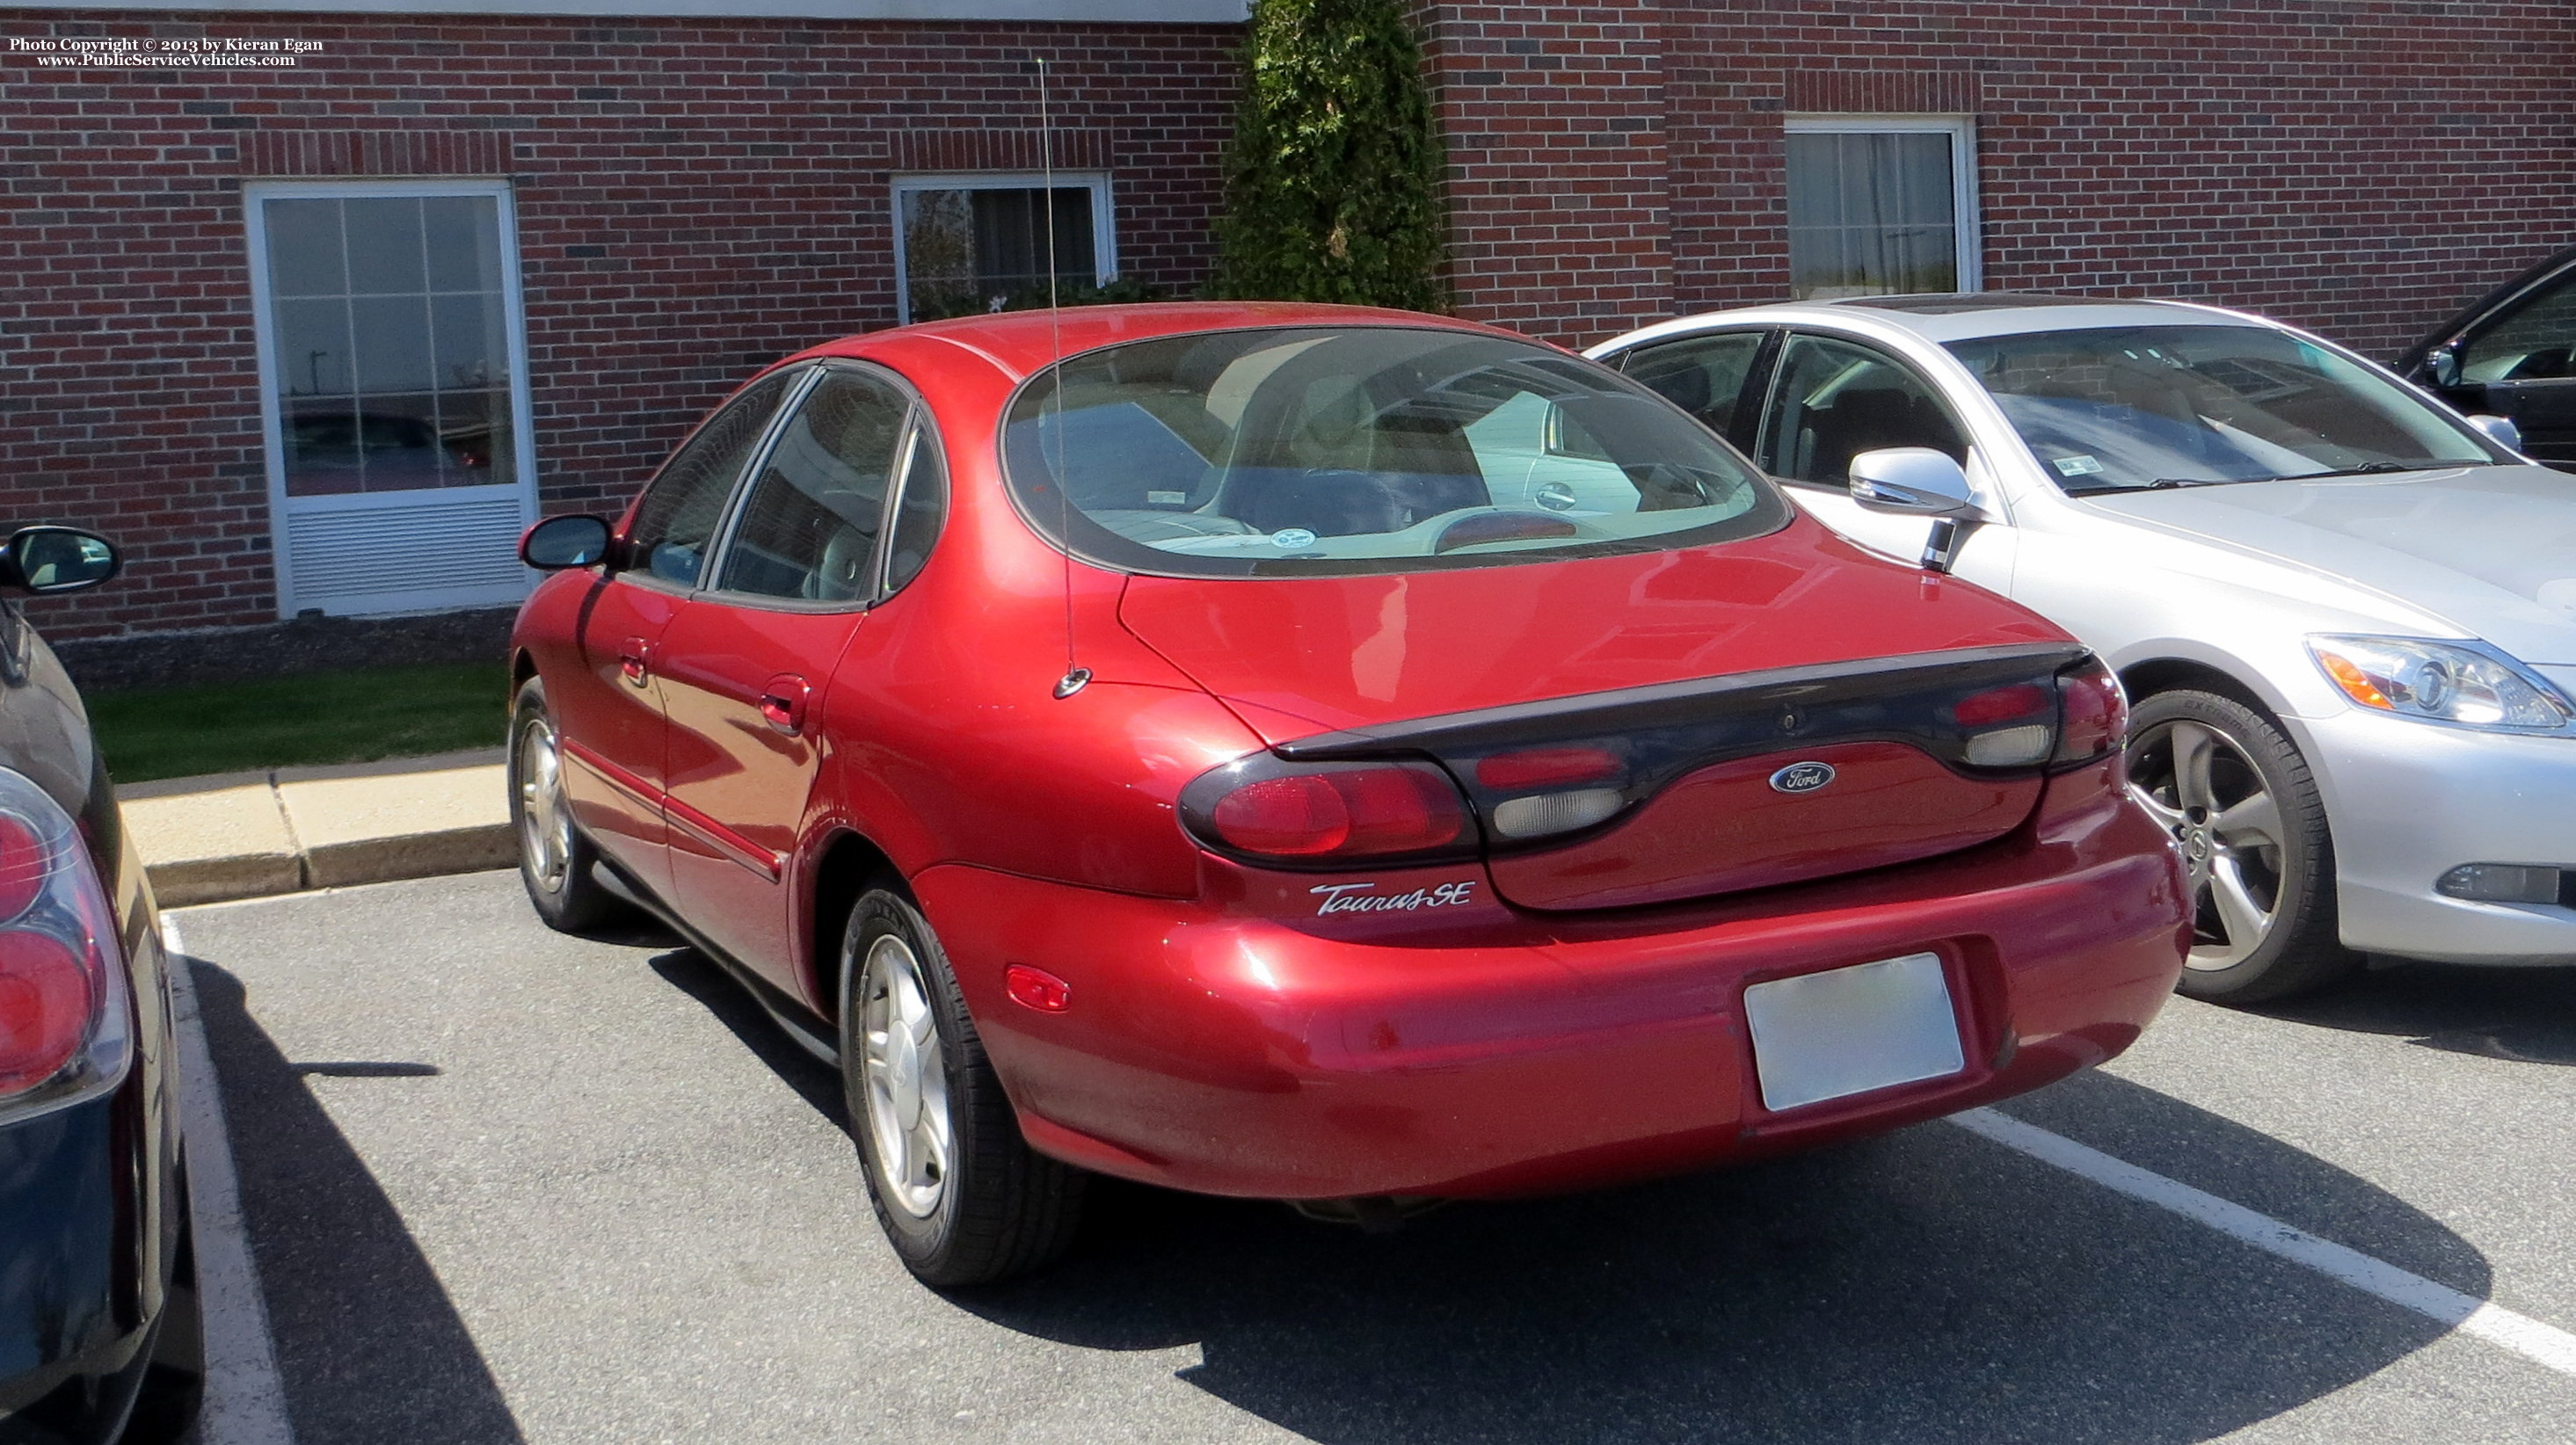 A photo  of Rhode Island State Police
            Unmarked Unit, a 1996-1999 Ford Taurus             taken by Kieran Egan